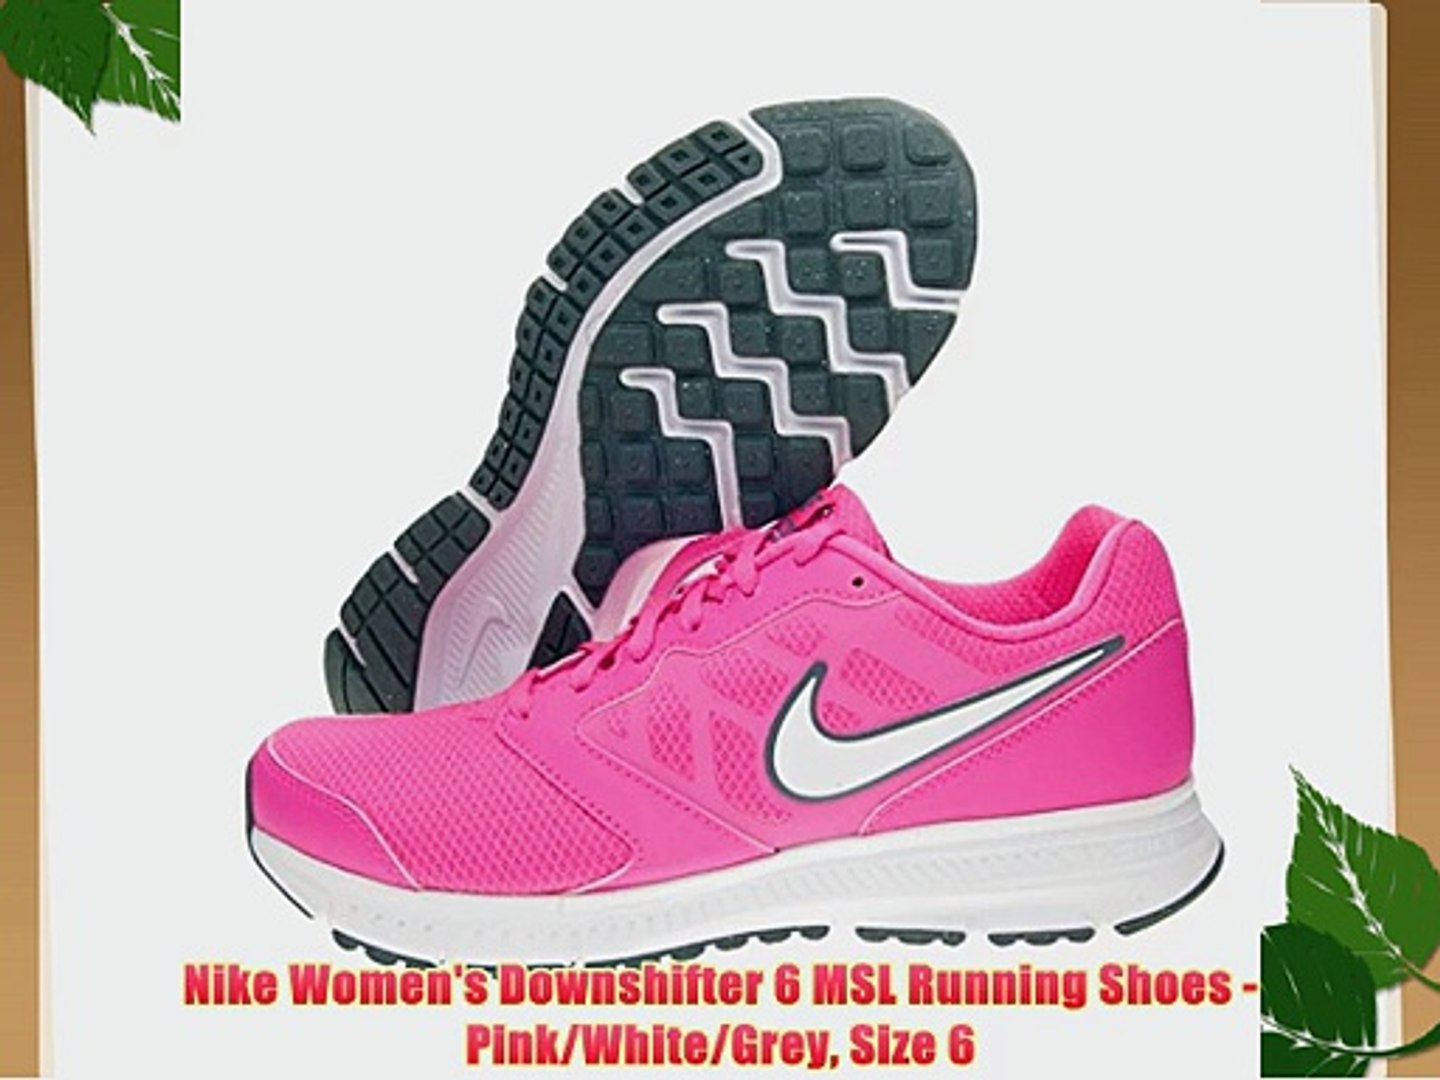 nike downshifter 6 msl running shoes